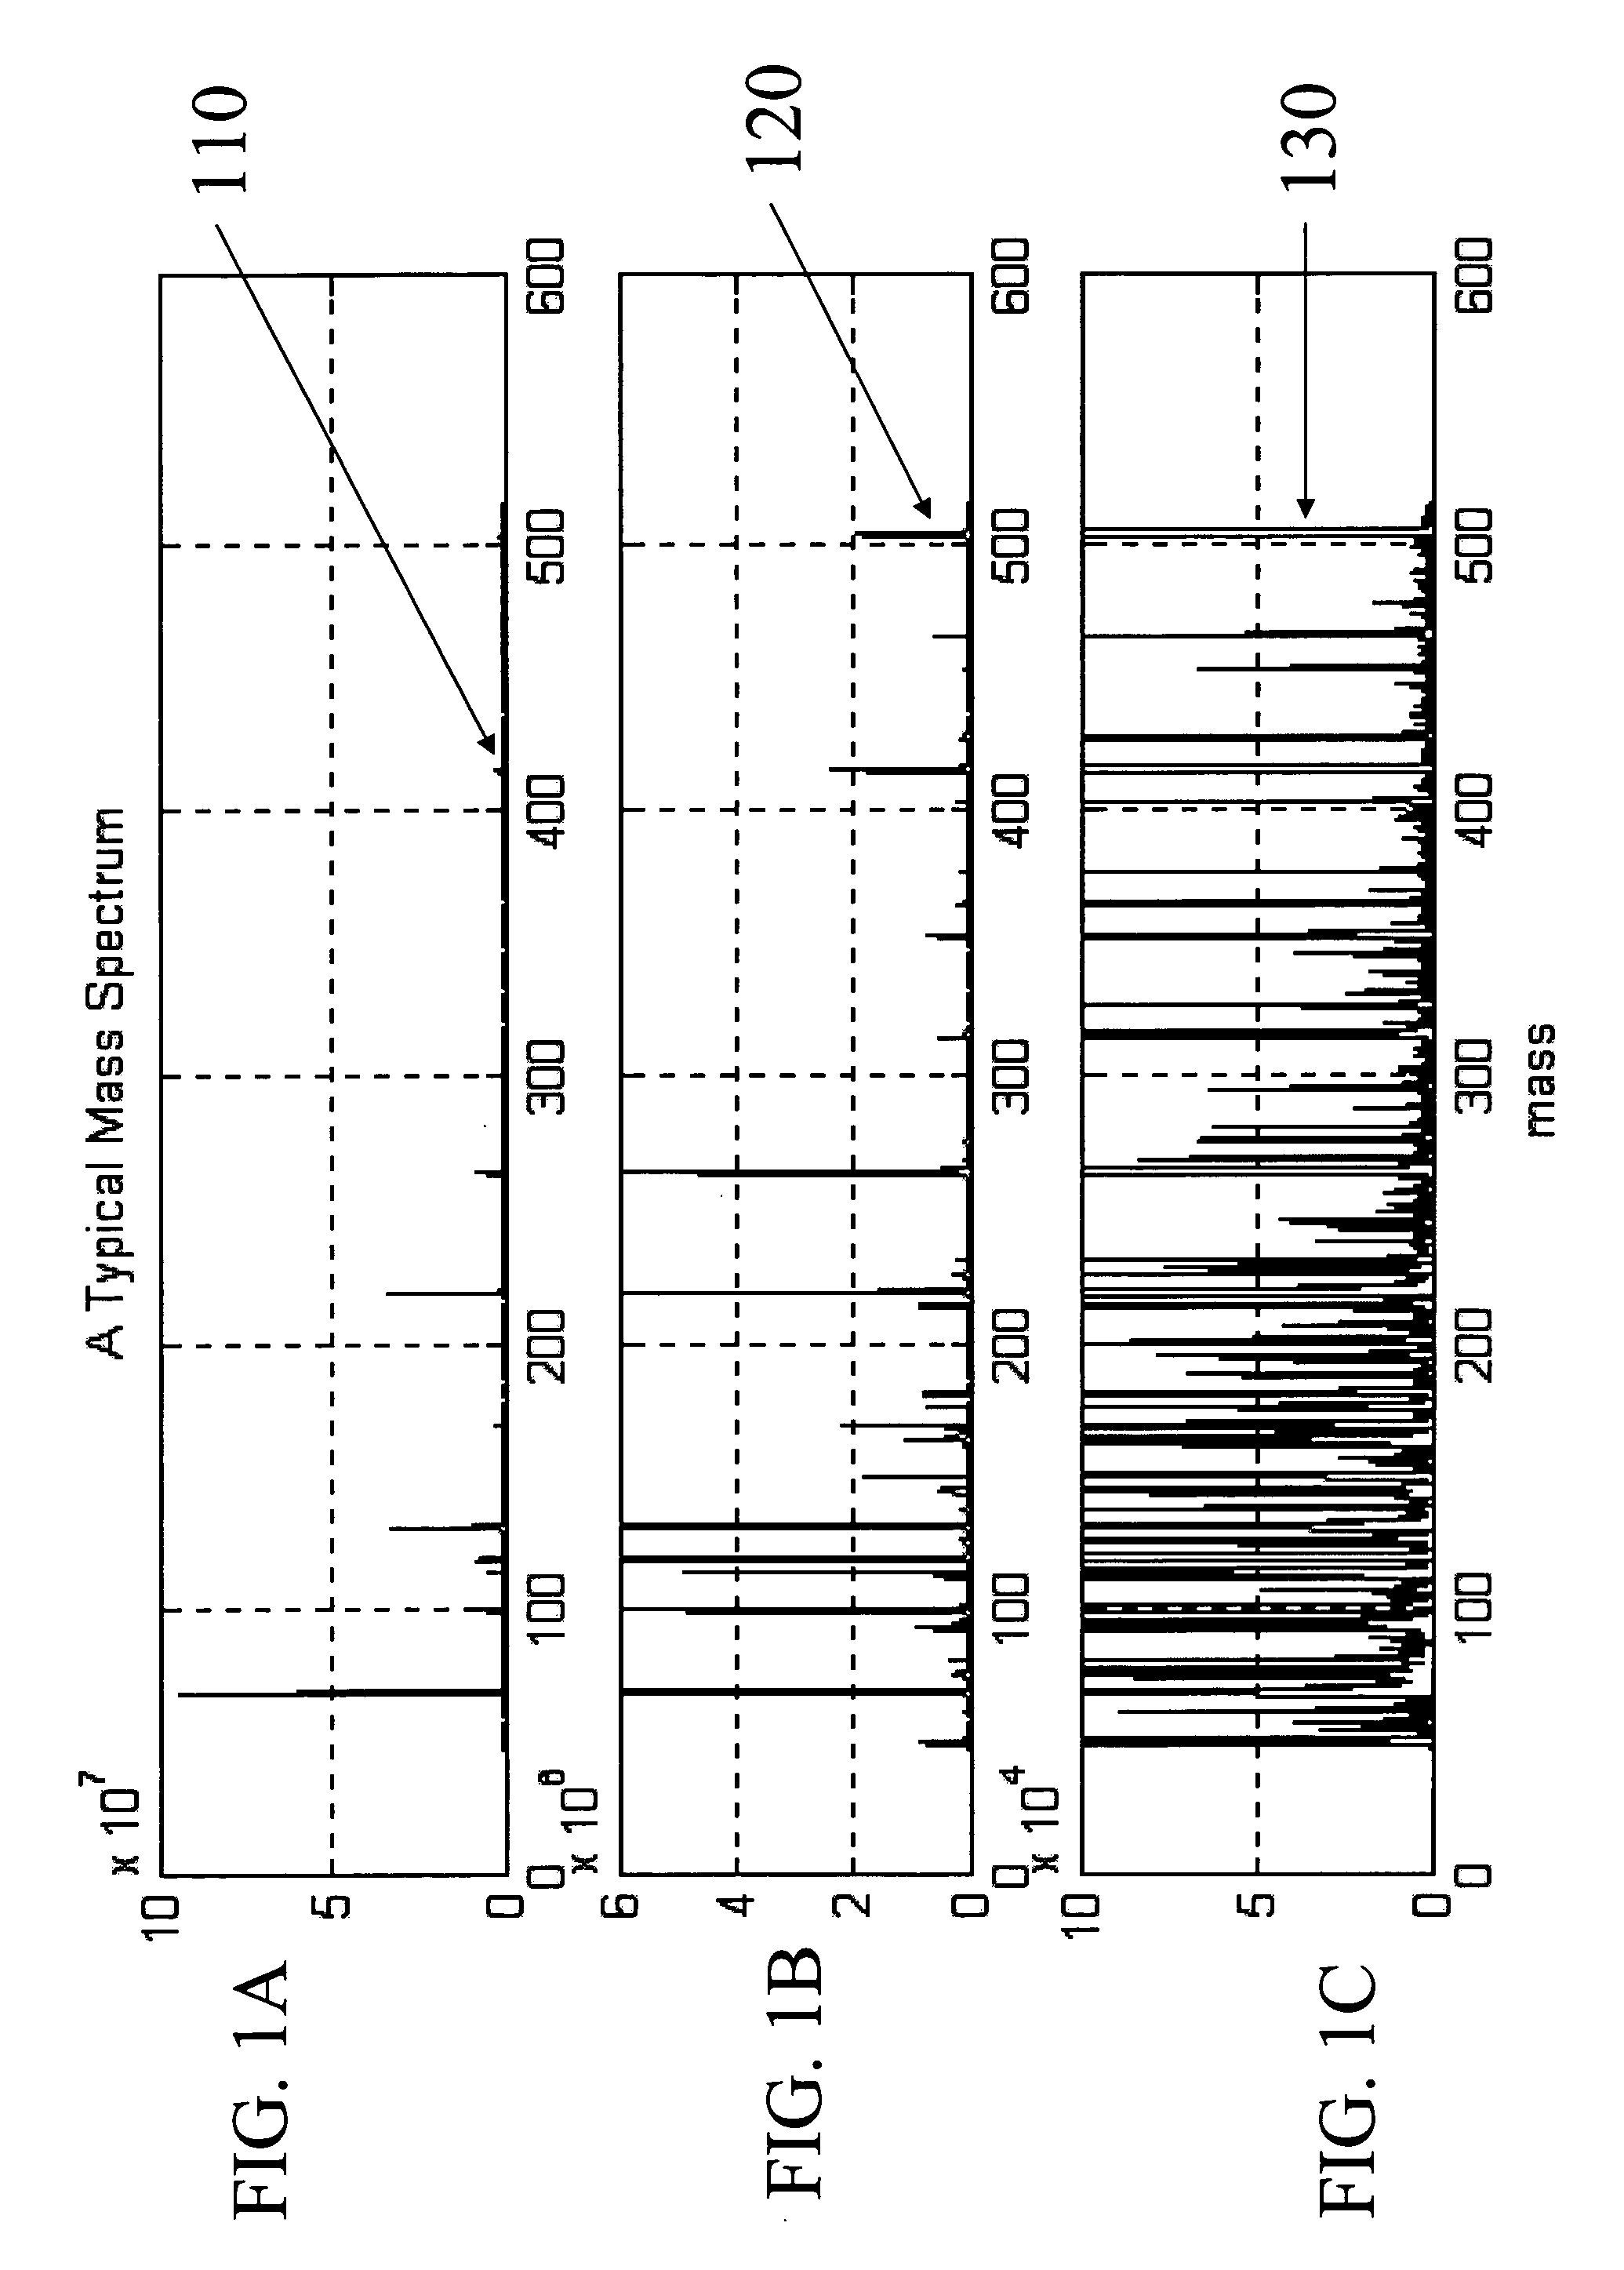 Methods for operating mass spectrometry (MS) instrument systems